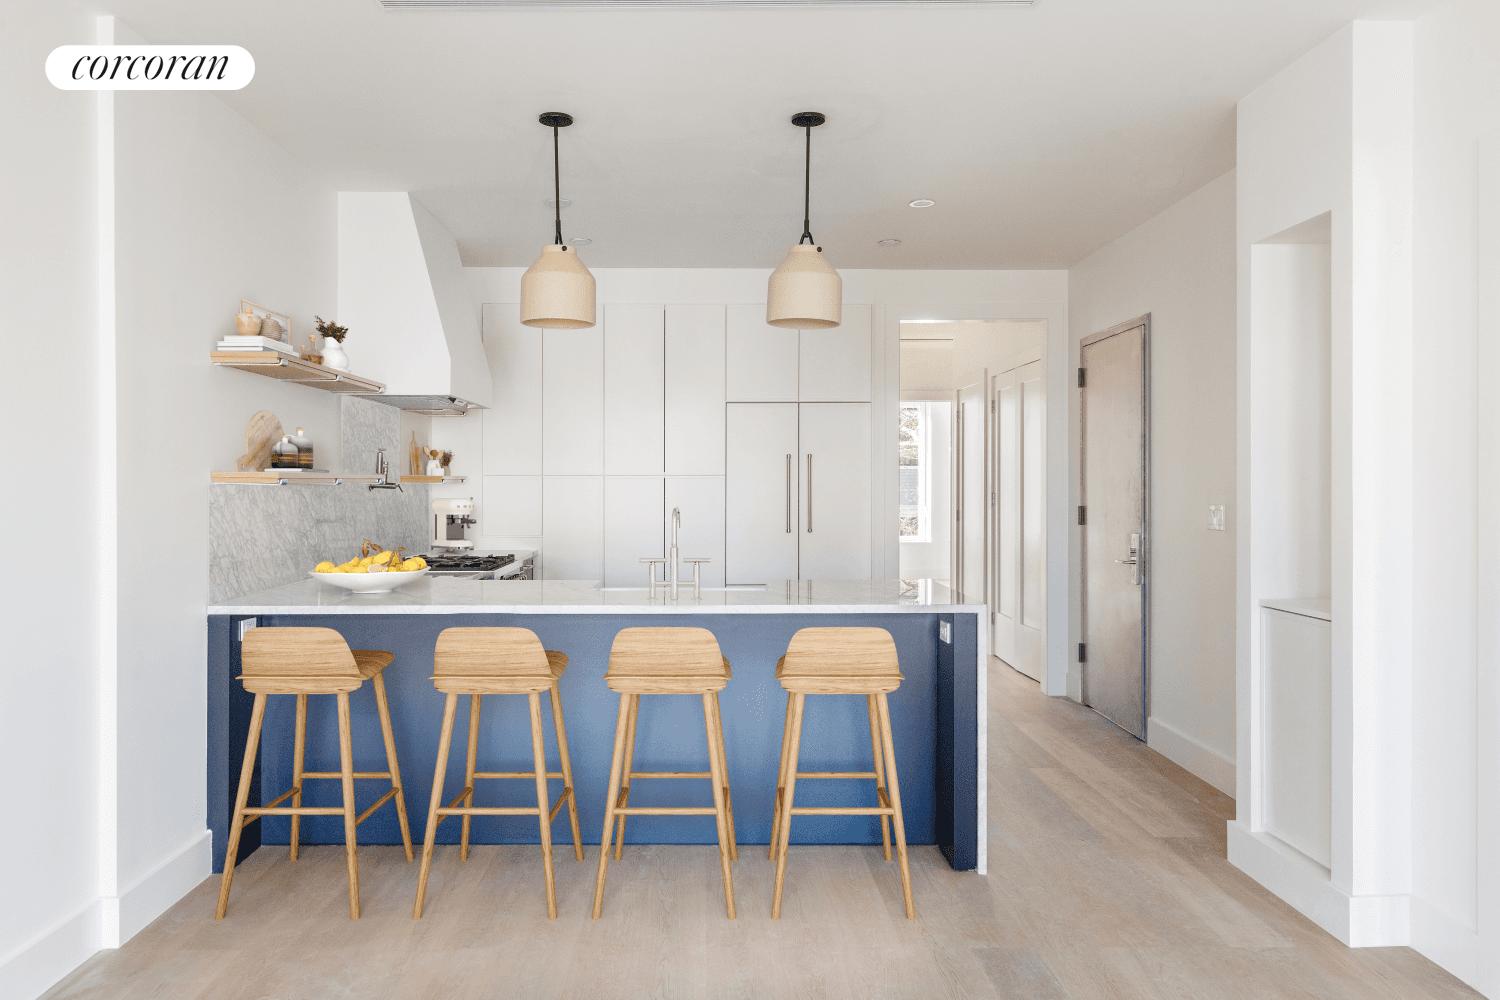 New amp ; Bespoke. In the historic, up and coming Brooklyn neighborhood of Greenwood Heights, this newly built 4 unit condo conversion is an architectural standout.